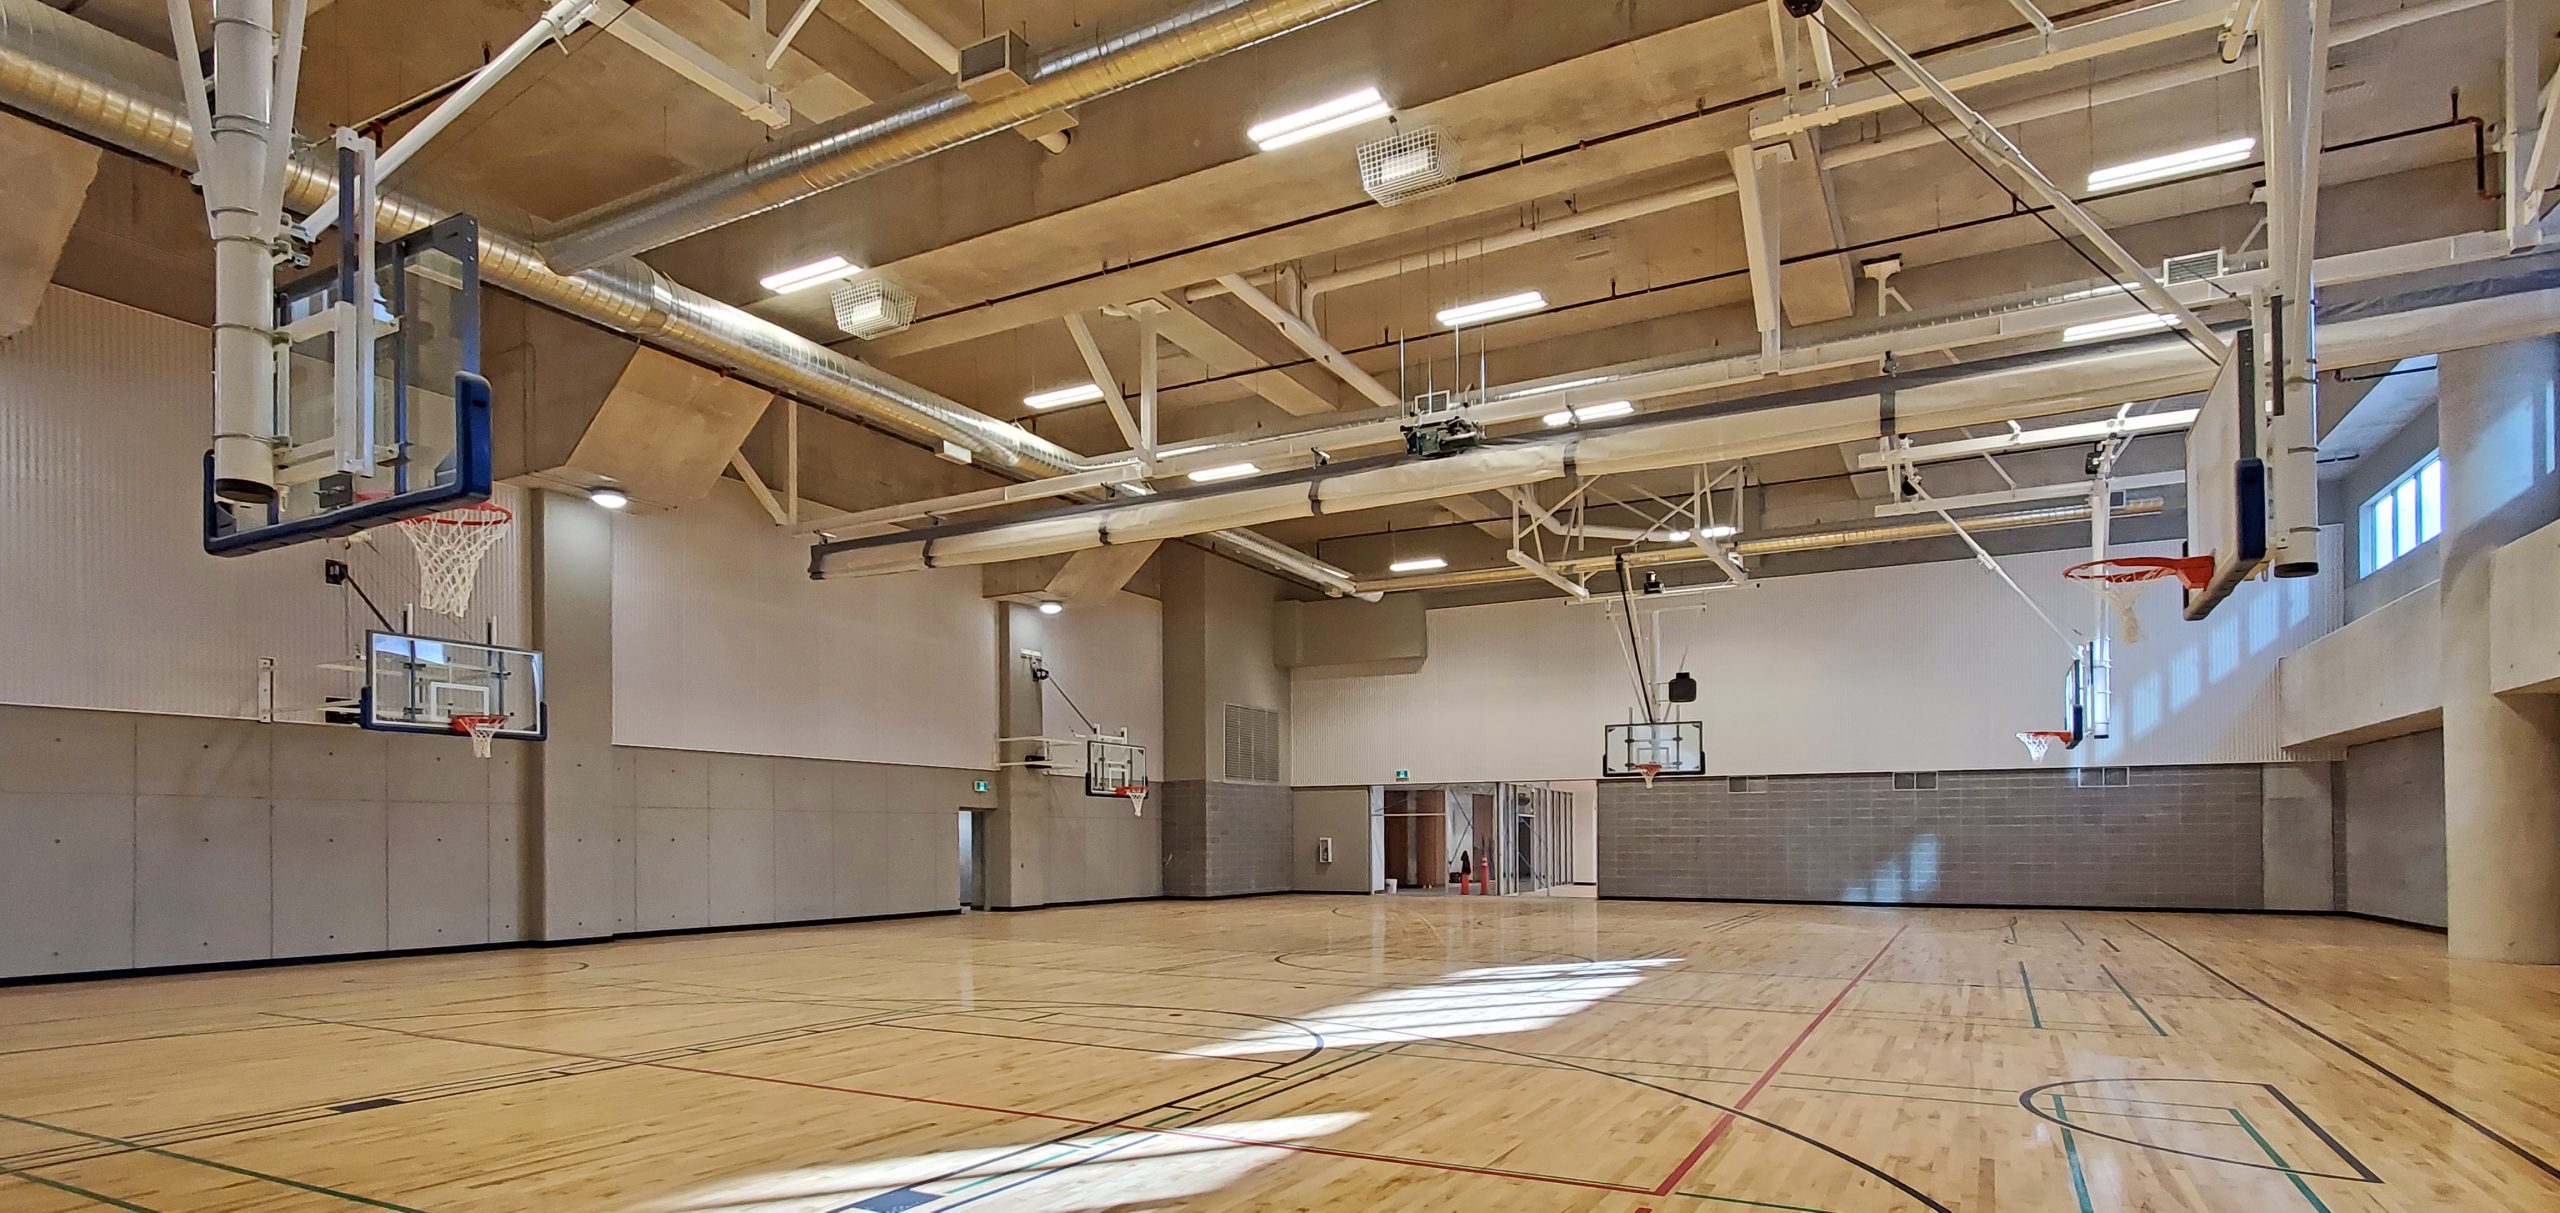 A photo of the indoor double-gymnasium at One Yonge Community Recreation Centre which shows a large gym with six basketball hoops and the unfinished gym entrance in the background.